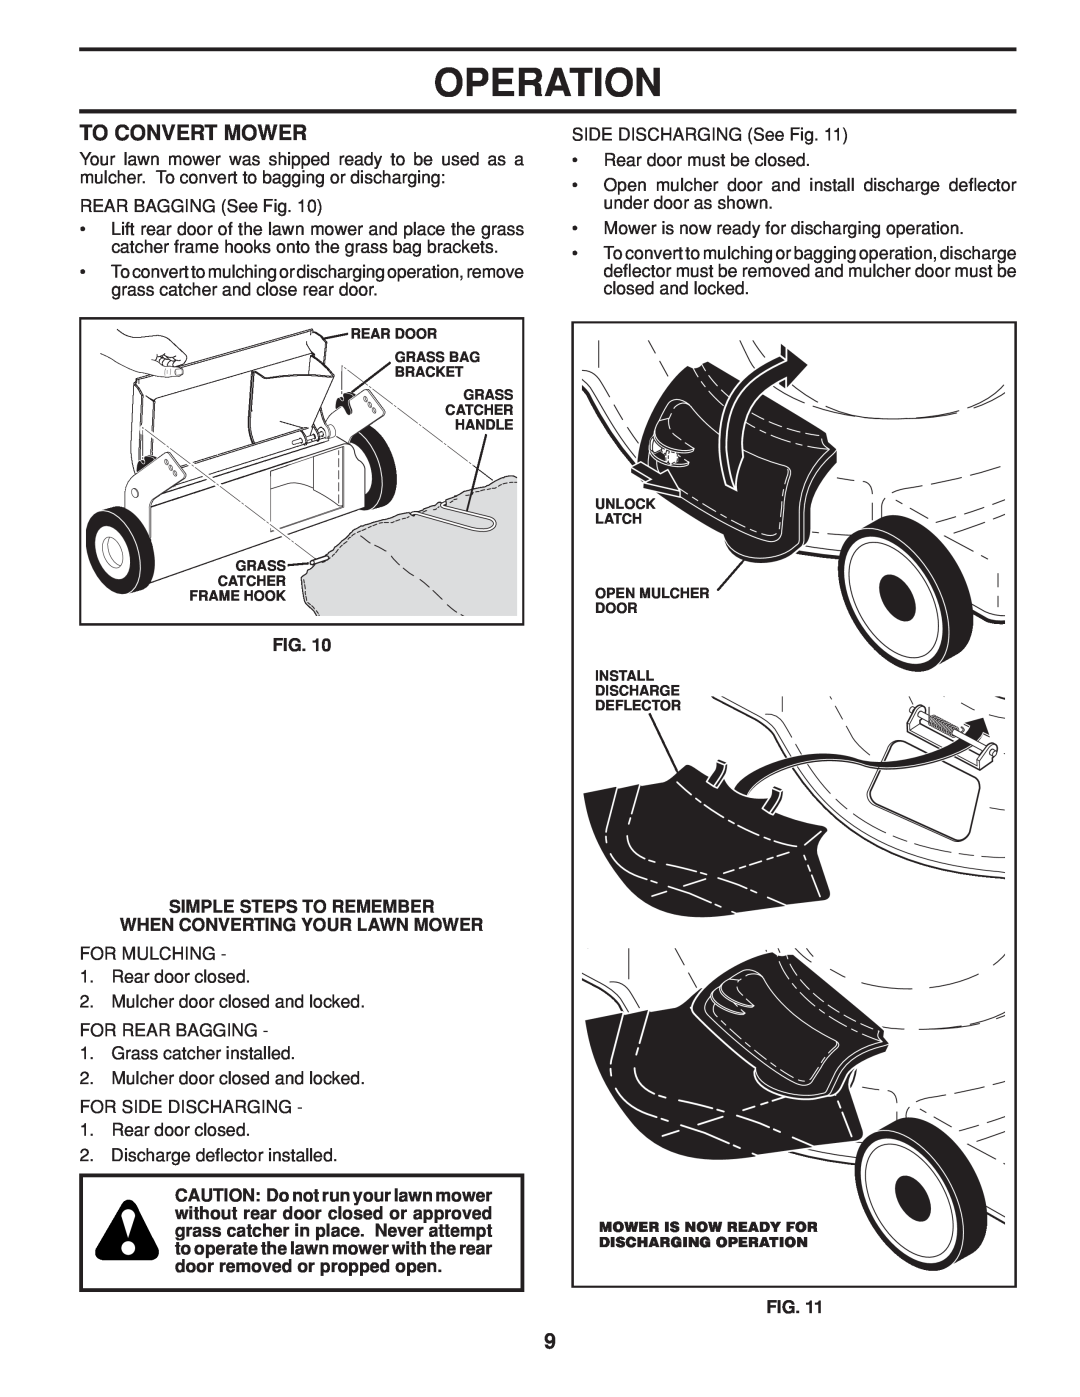 Husqvarna 961430104, 961430103 To Convert Mower, Operation, Simple Steps To Remember When Converting Your Lawn Mower 